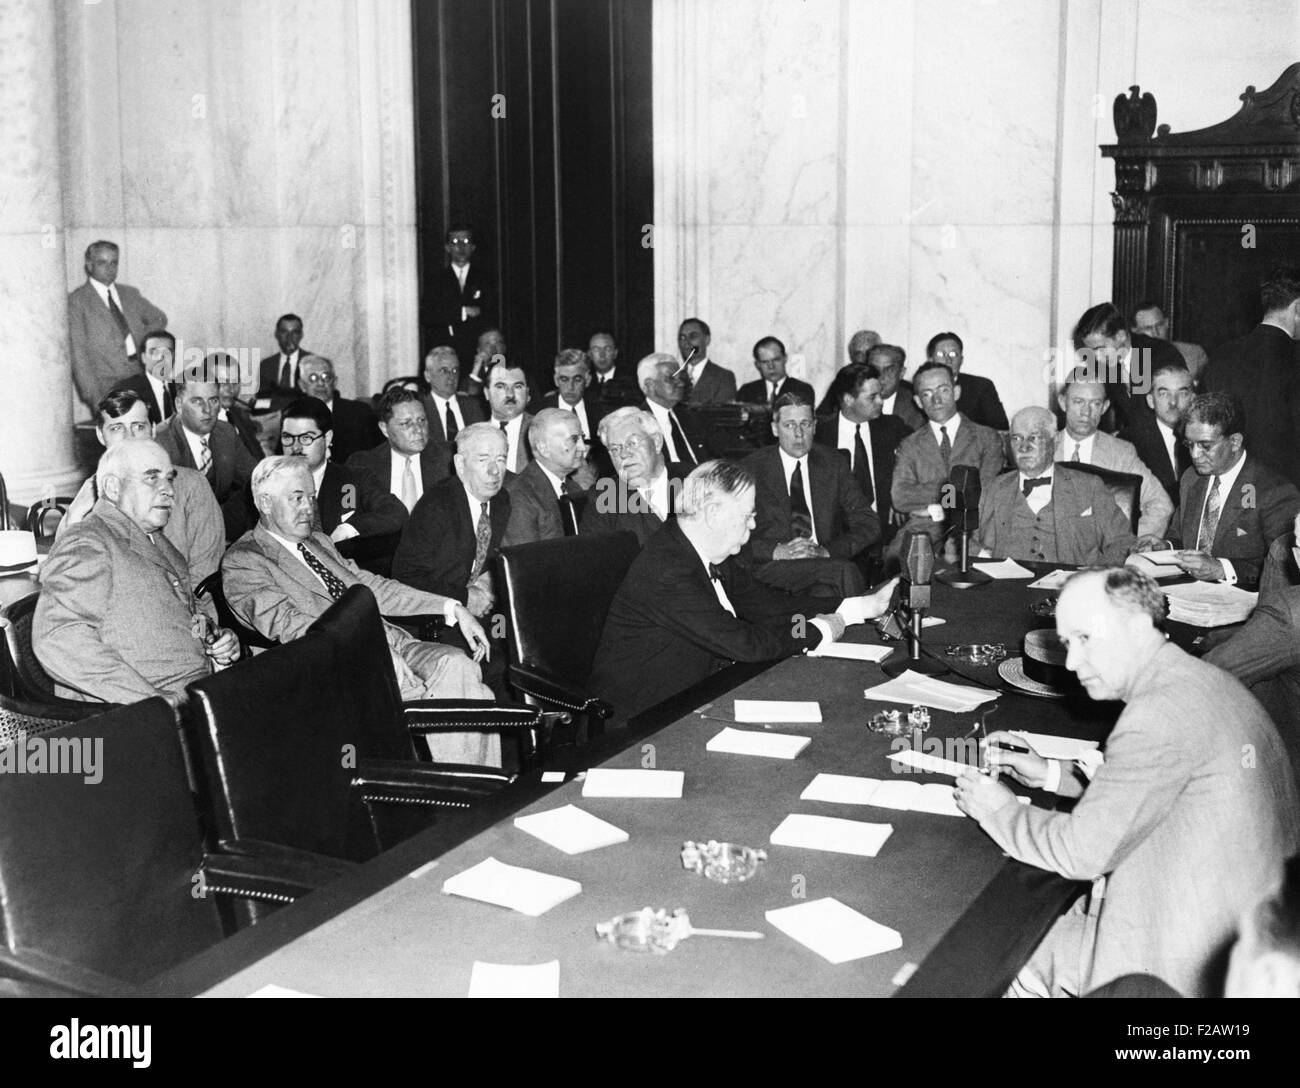 The witnesses and Senators at the Senate Banking and Currency Committee hearing. May 26, 1933. J.P. Morgan was seated at far left in the Caucus Room of the Senate Office Building. The committee learned that the Morgan Bank offered stocks at discounted rates to many influential people, including former President Calvin Coolidge and Supreme Court justice Owen J. Roberts. (CSU 2015 11 1501) Stock Photo